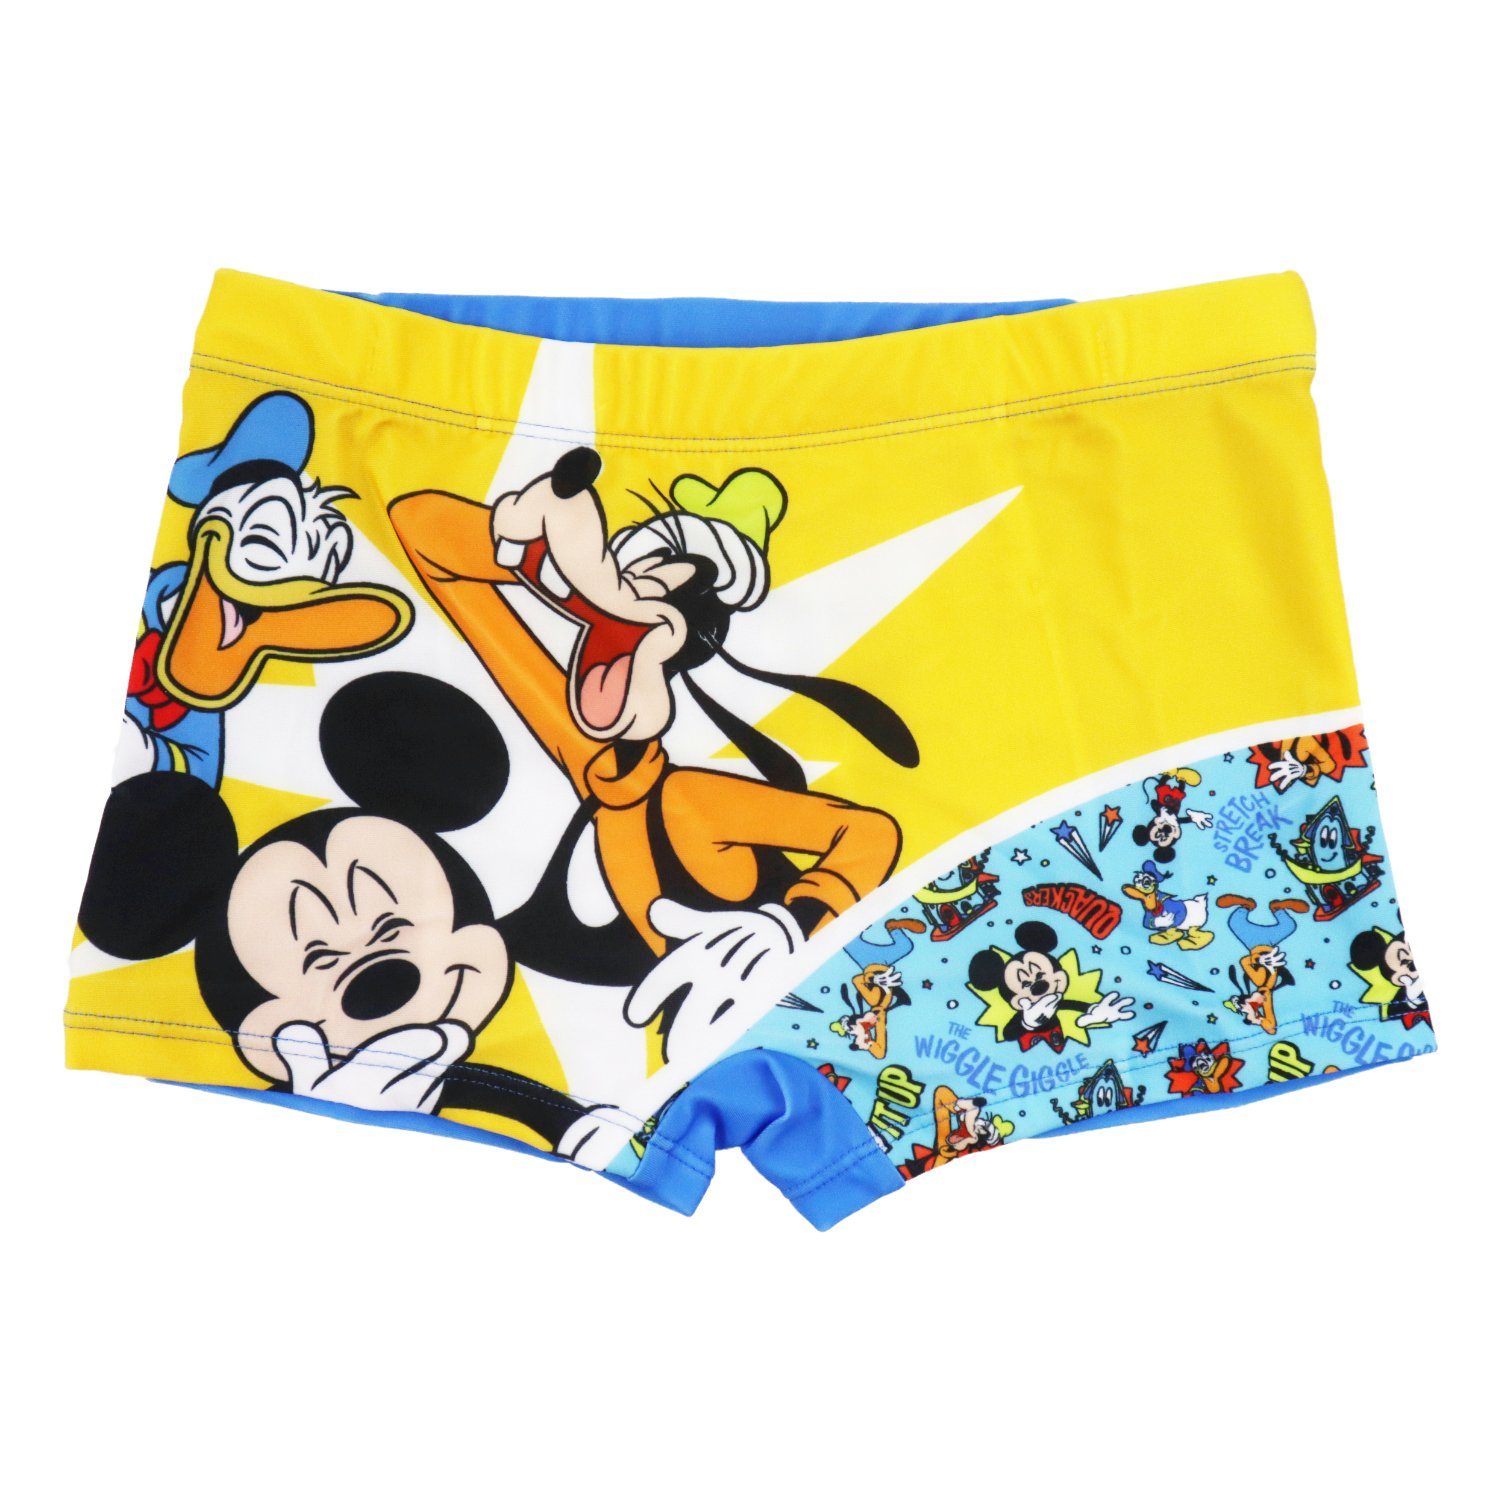 Disney Mickey Mouse Badehose Mickey Maus Donald Duck Goofy Kinder Jungen  Badehose Badepants Gr. 98 bis 128